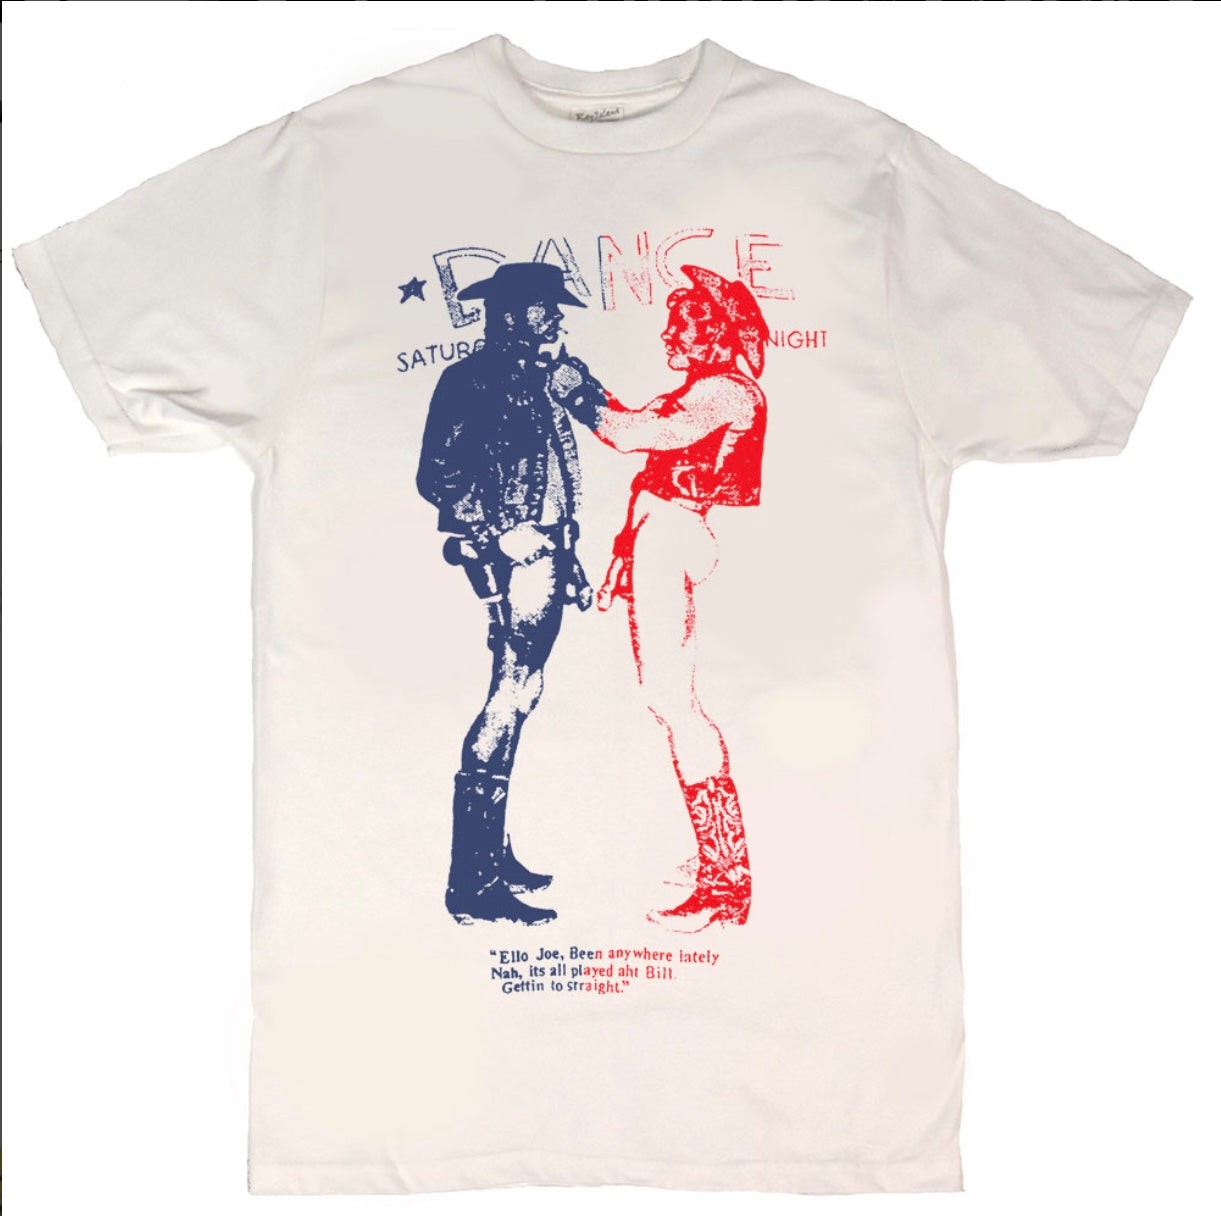 Vivienne Westwood Cowboys” Seditionaries T-Shirts – Posers Hollywood